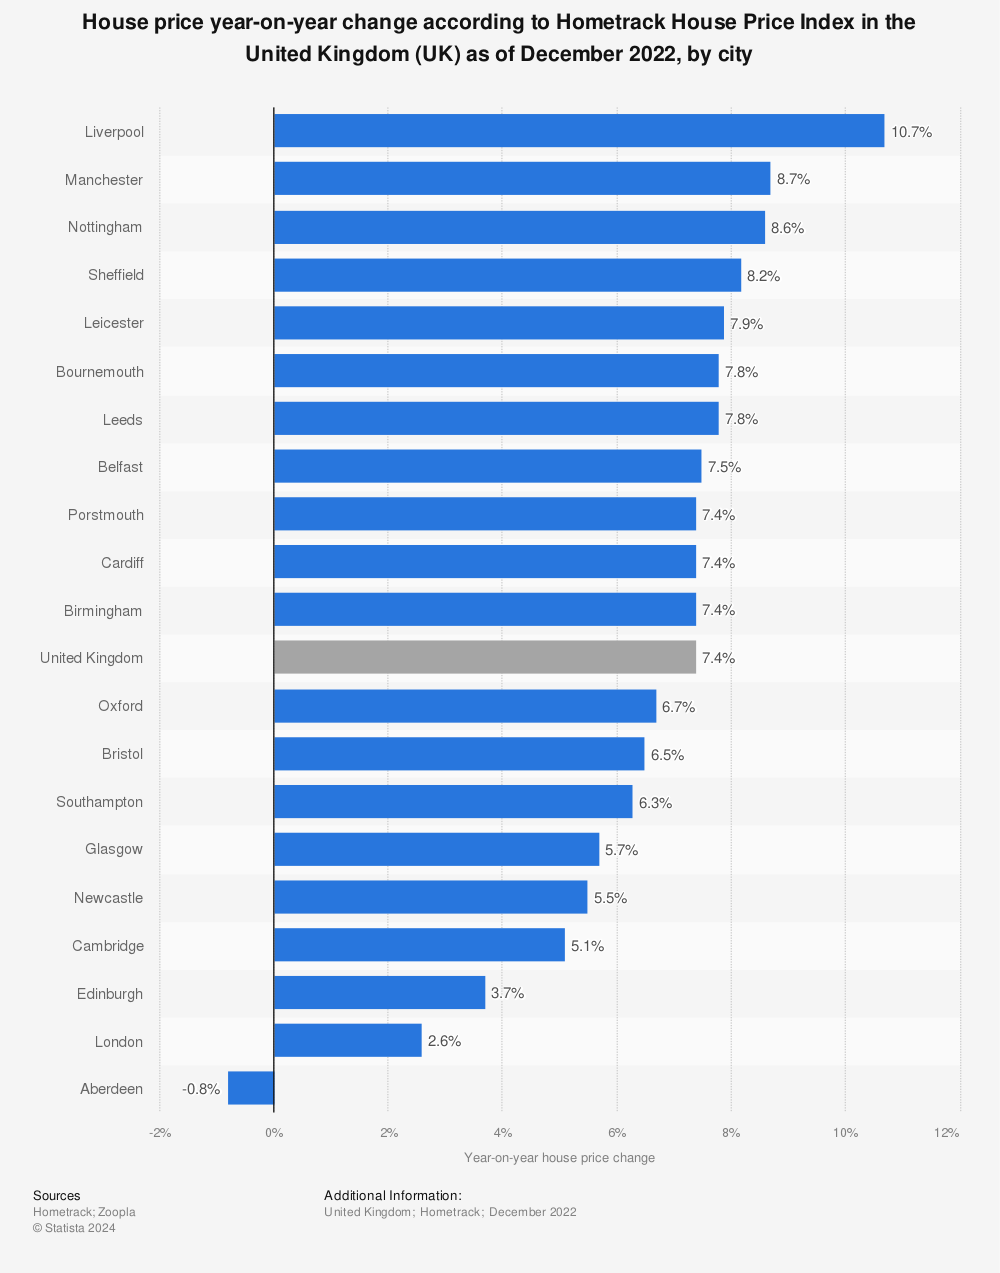 Statistic: House price year-on-year change according to Hometrack House Price Index in the United Kingdom (UK) as of April 2021, by city  | Statista